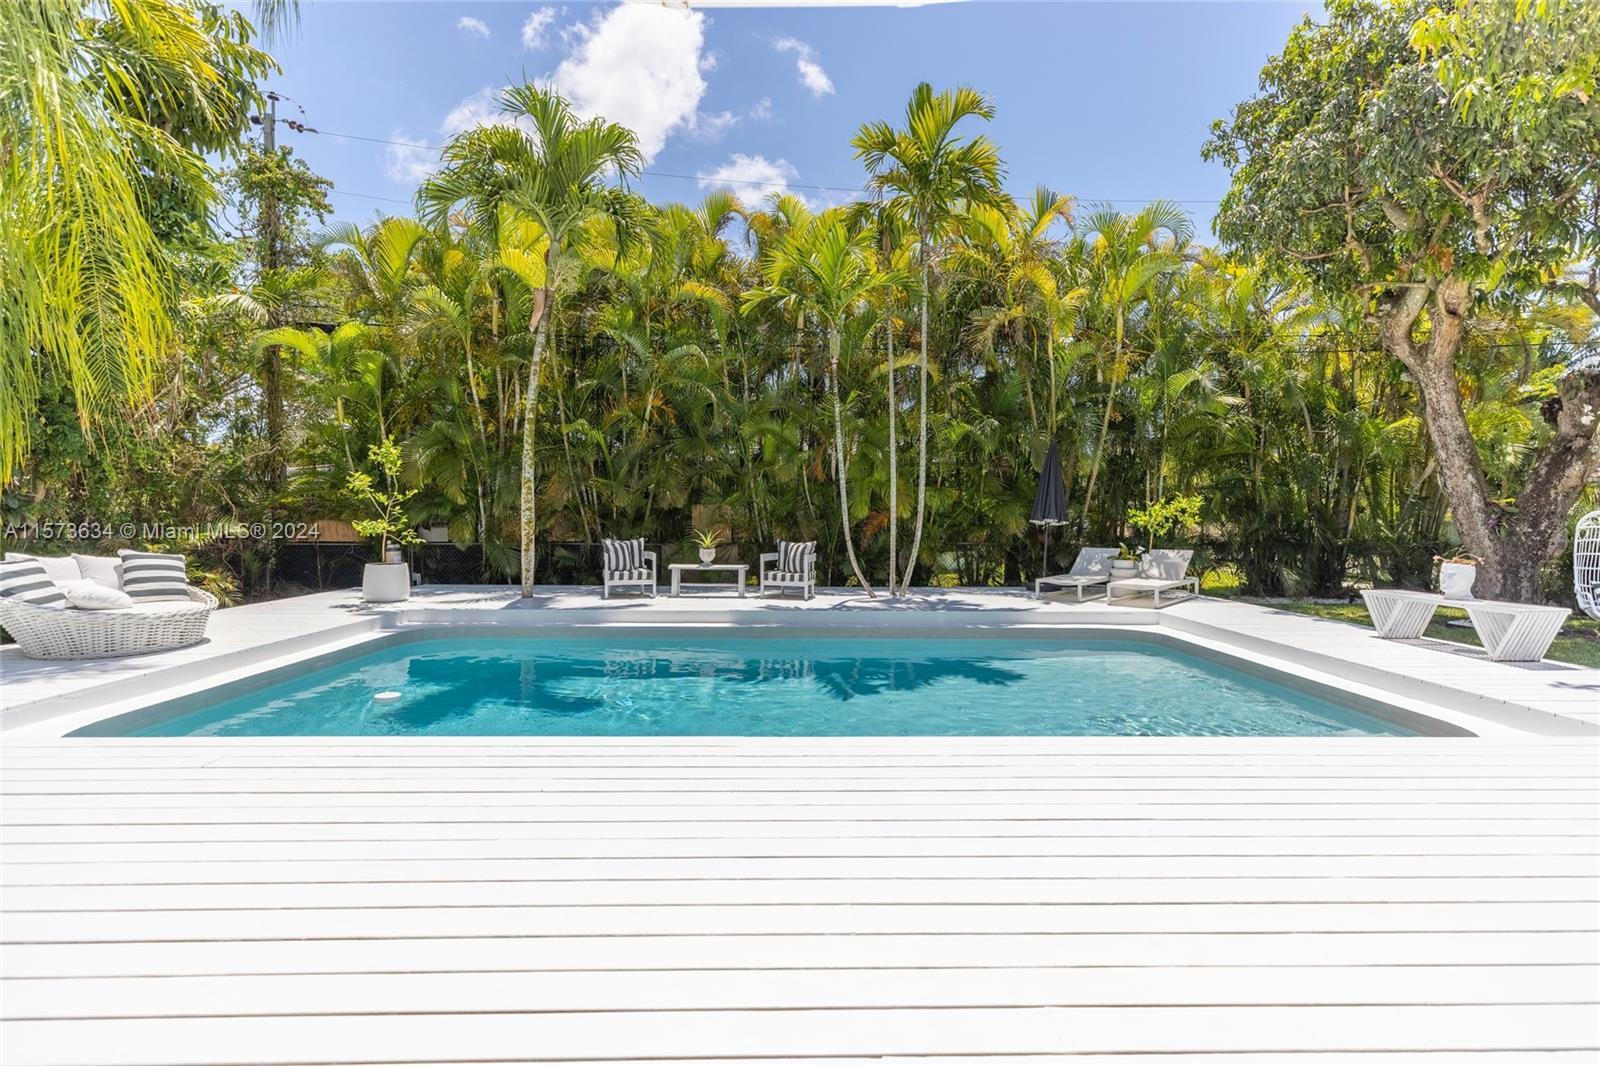 Key West-style home situated in the picturesque surroundings of Miami Shores. Nestled on a spacious 